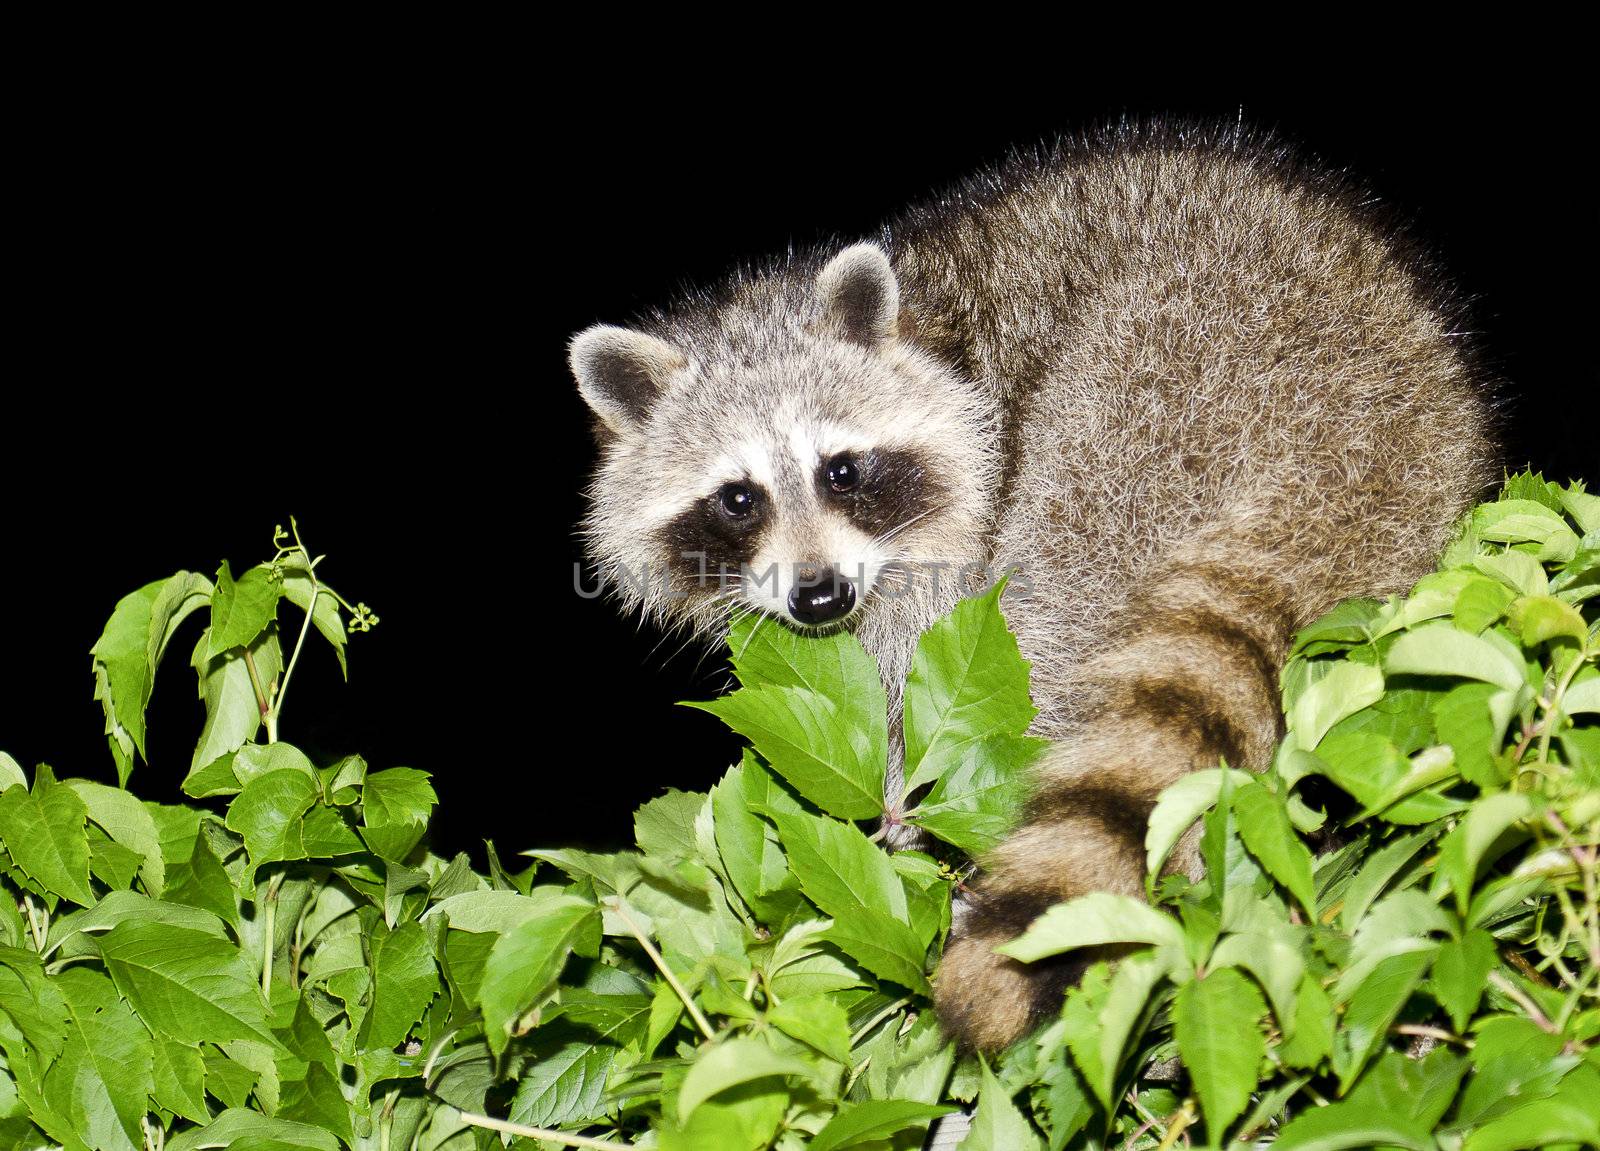 A mother raccoon looking for food at night.